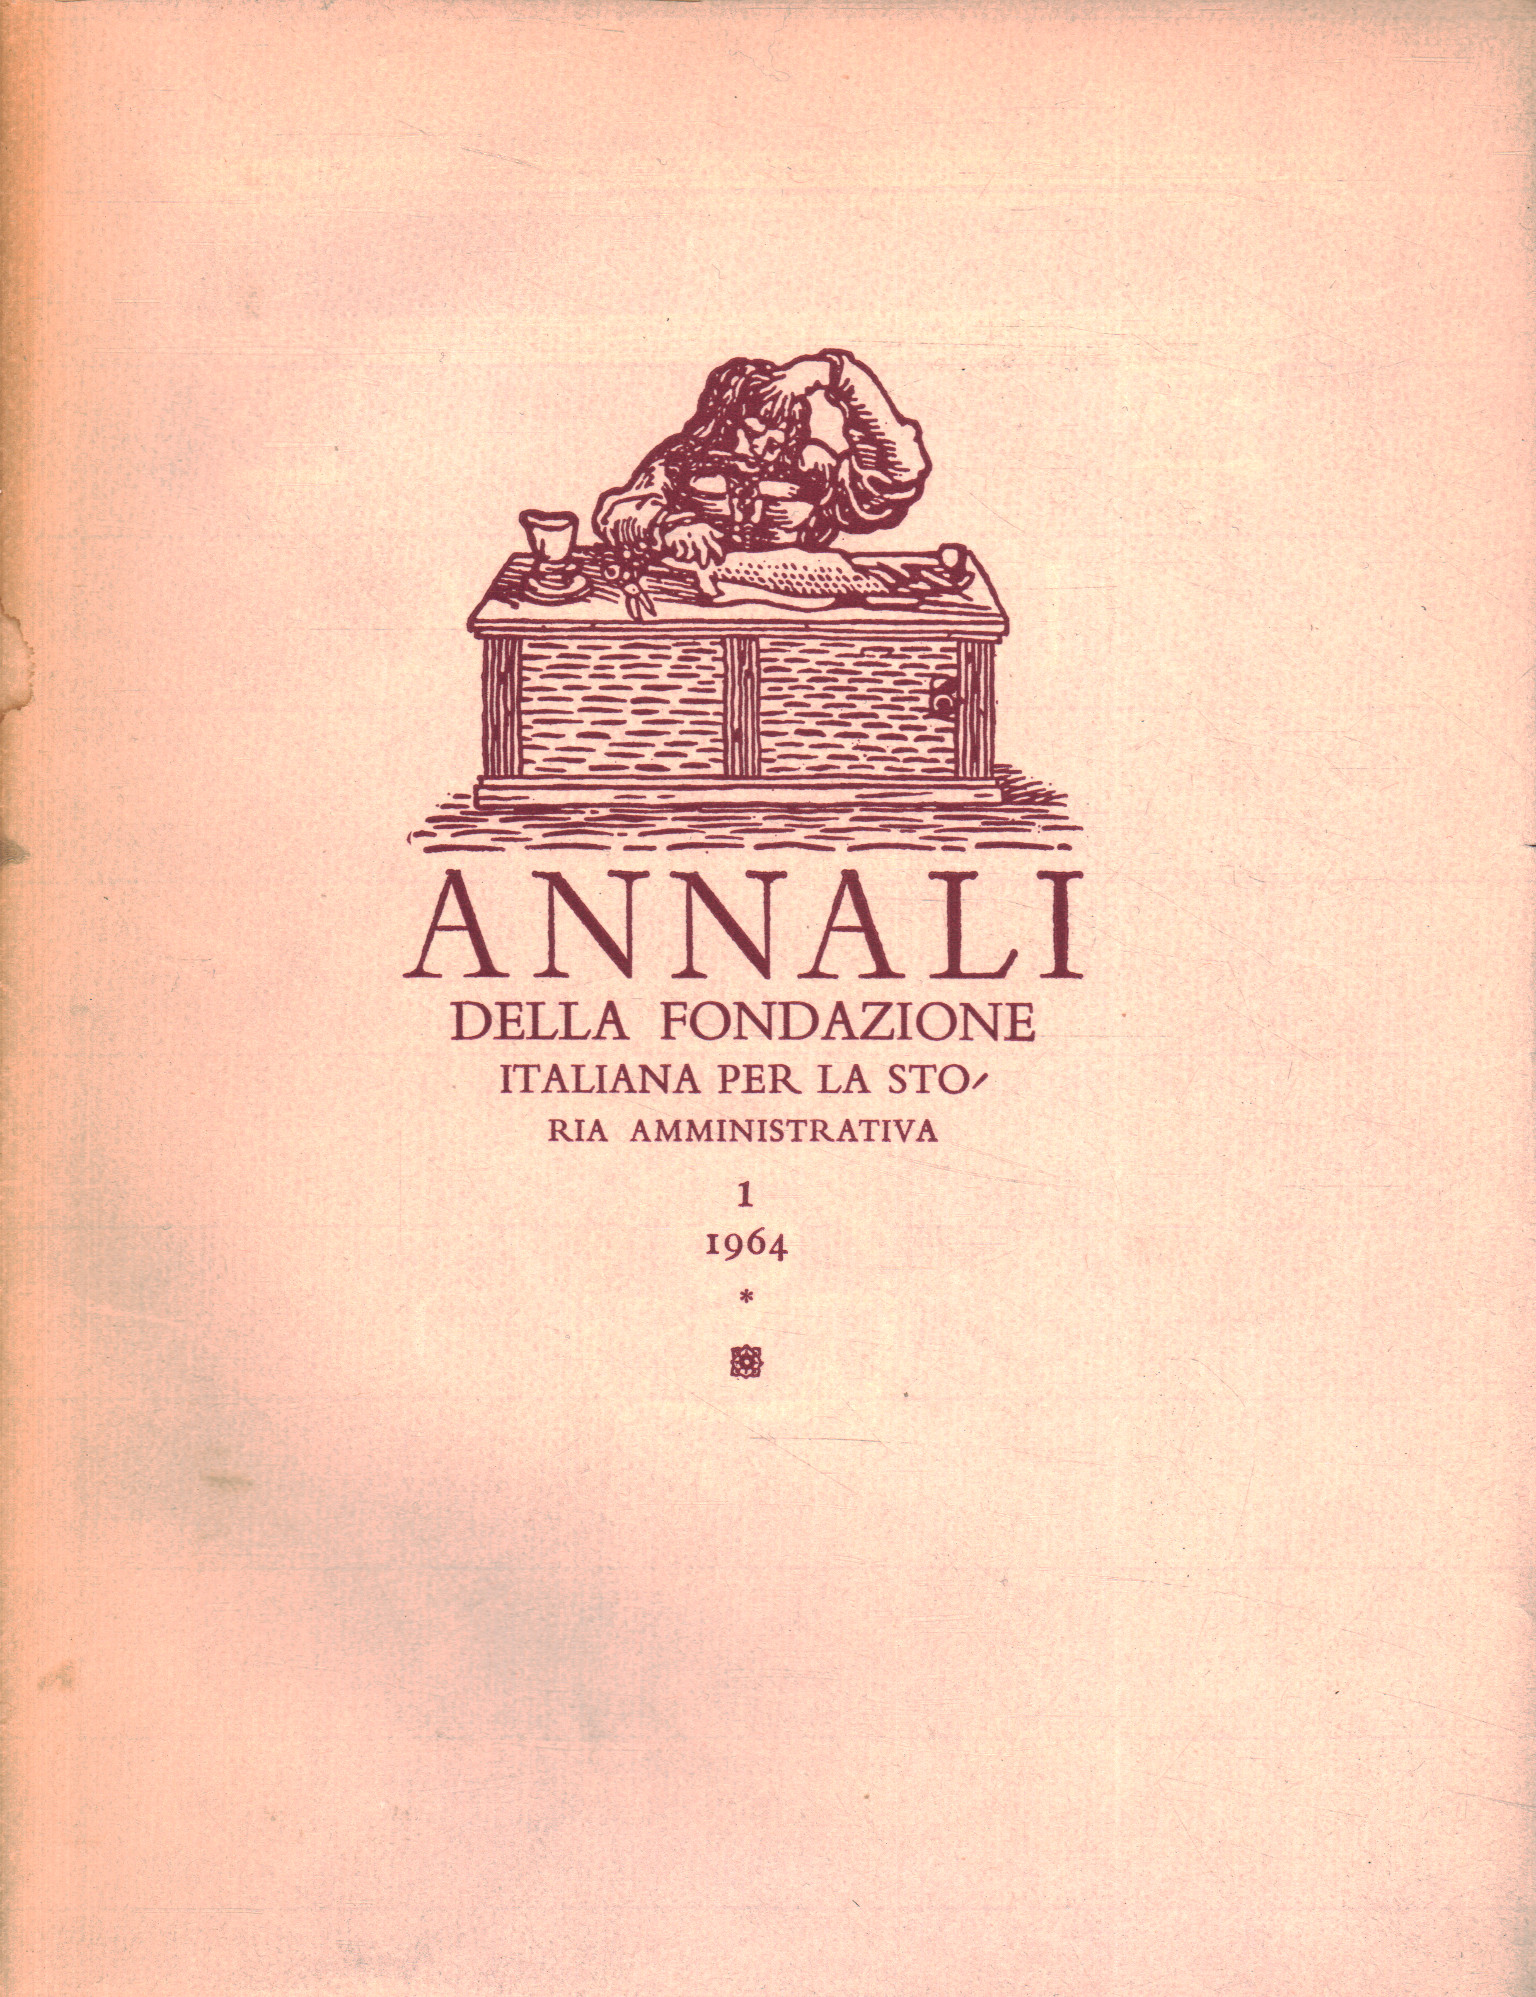 Annals of the Italian Foundation for the%, Annals of the Italian Foundation for the%, Annals of the Italian Foundation for the%